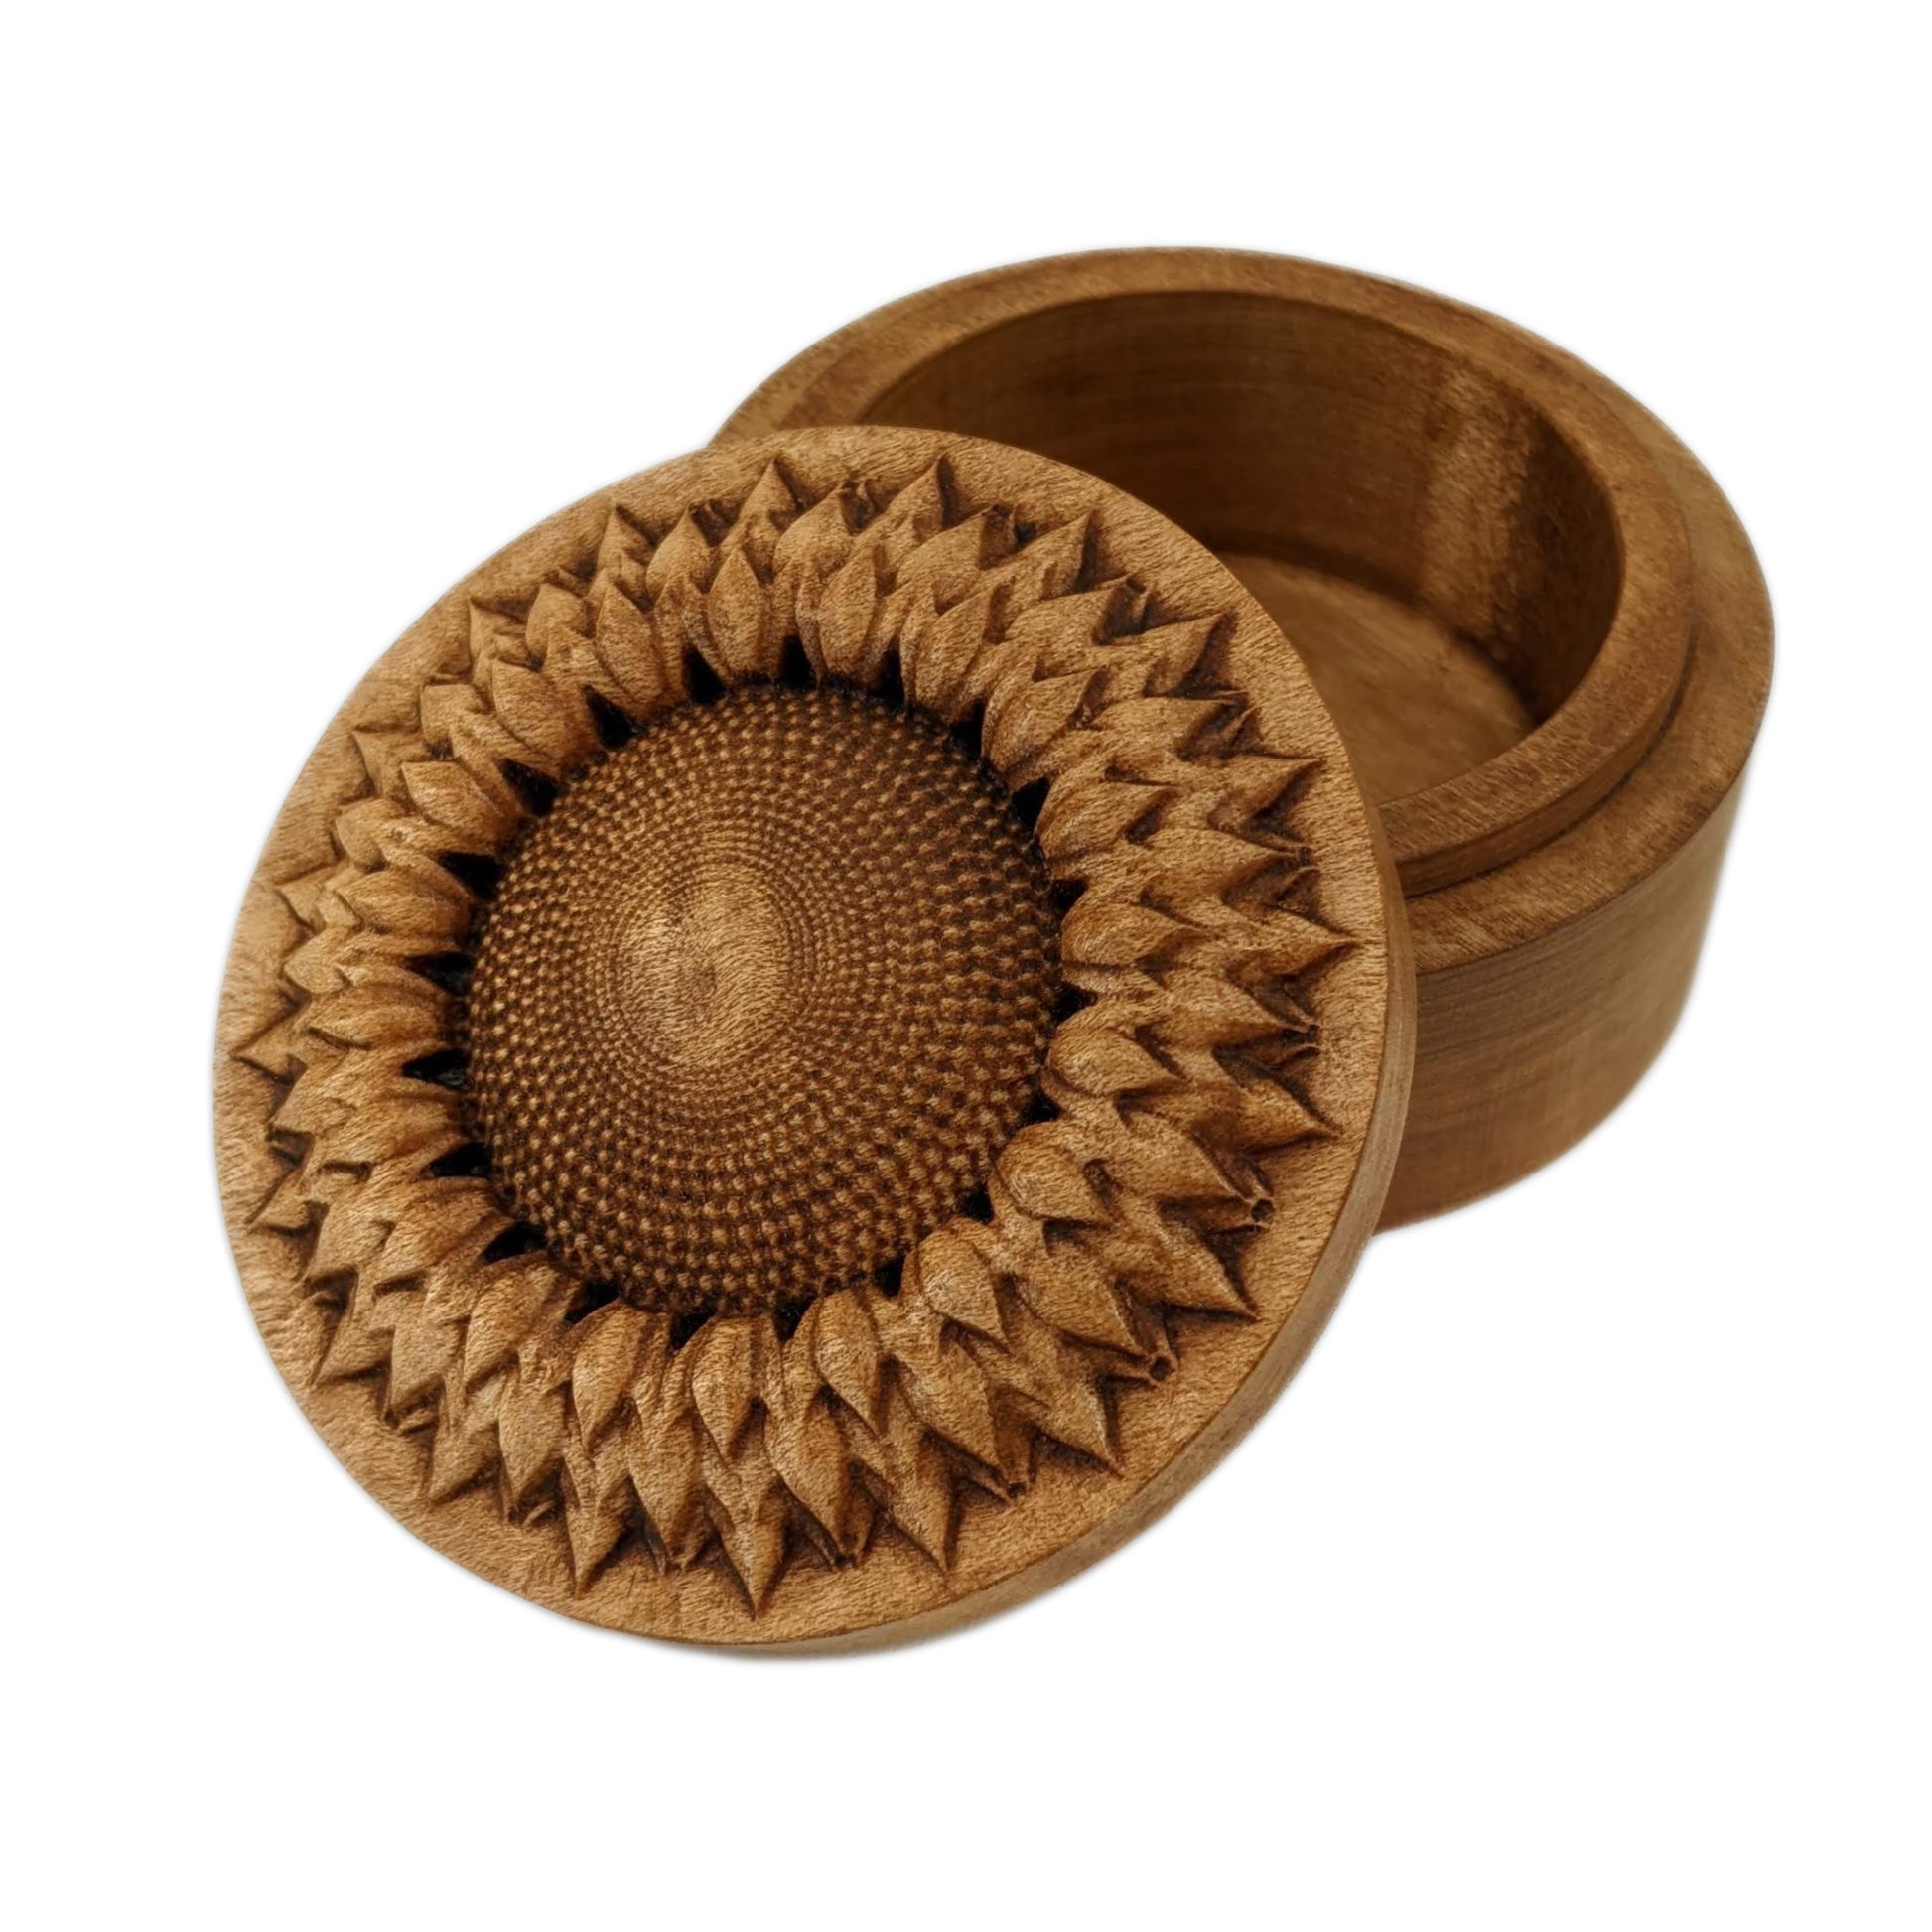 Round wooden box 3D carved with a  top down view of a intricately carved sunflower with dimples covering its center and multiple layered petals circling the center. Made from hard maple wood stained brown against a white background.